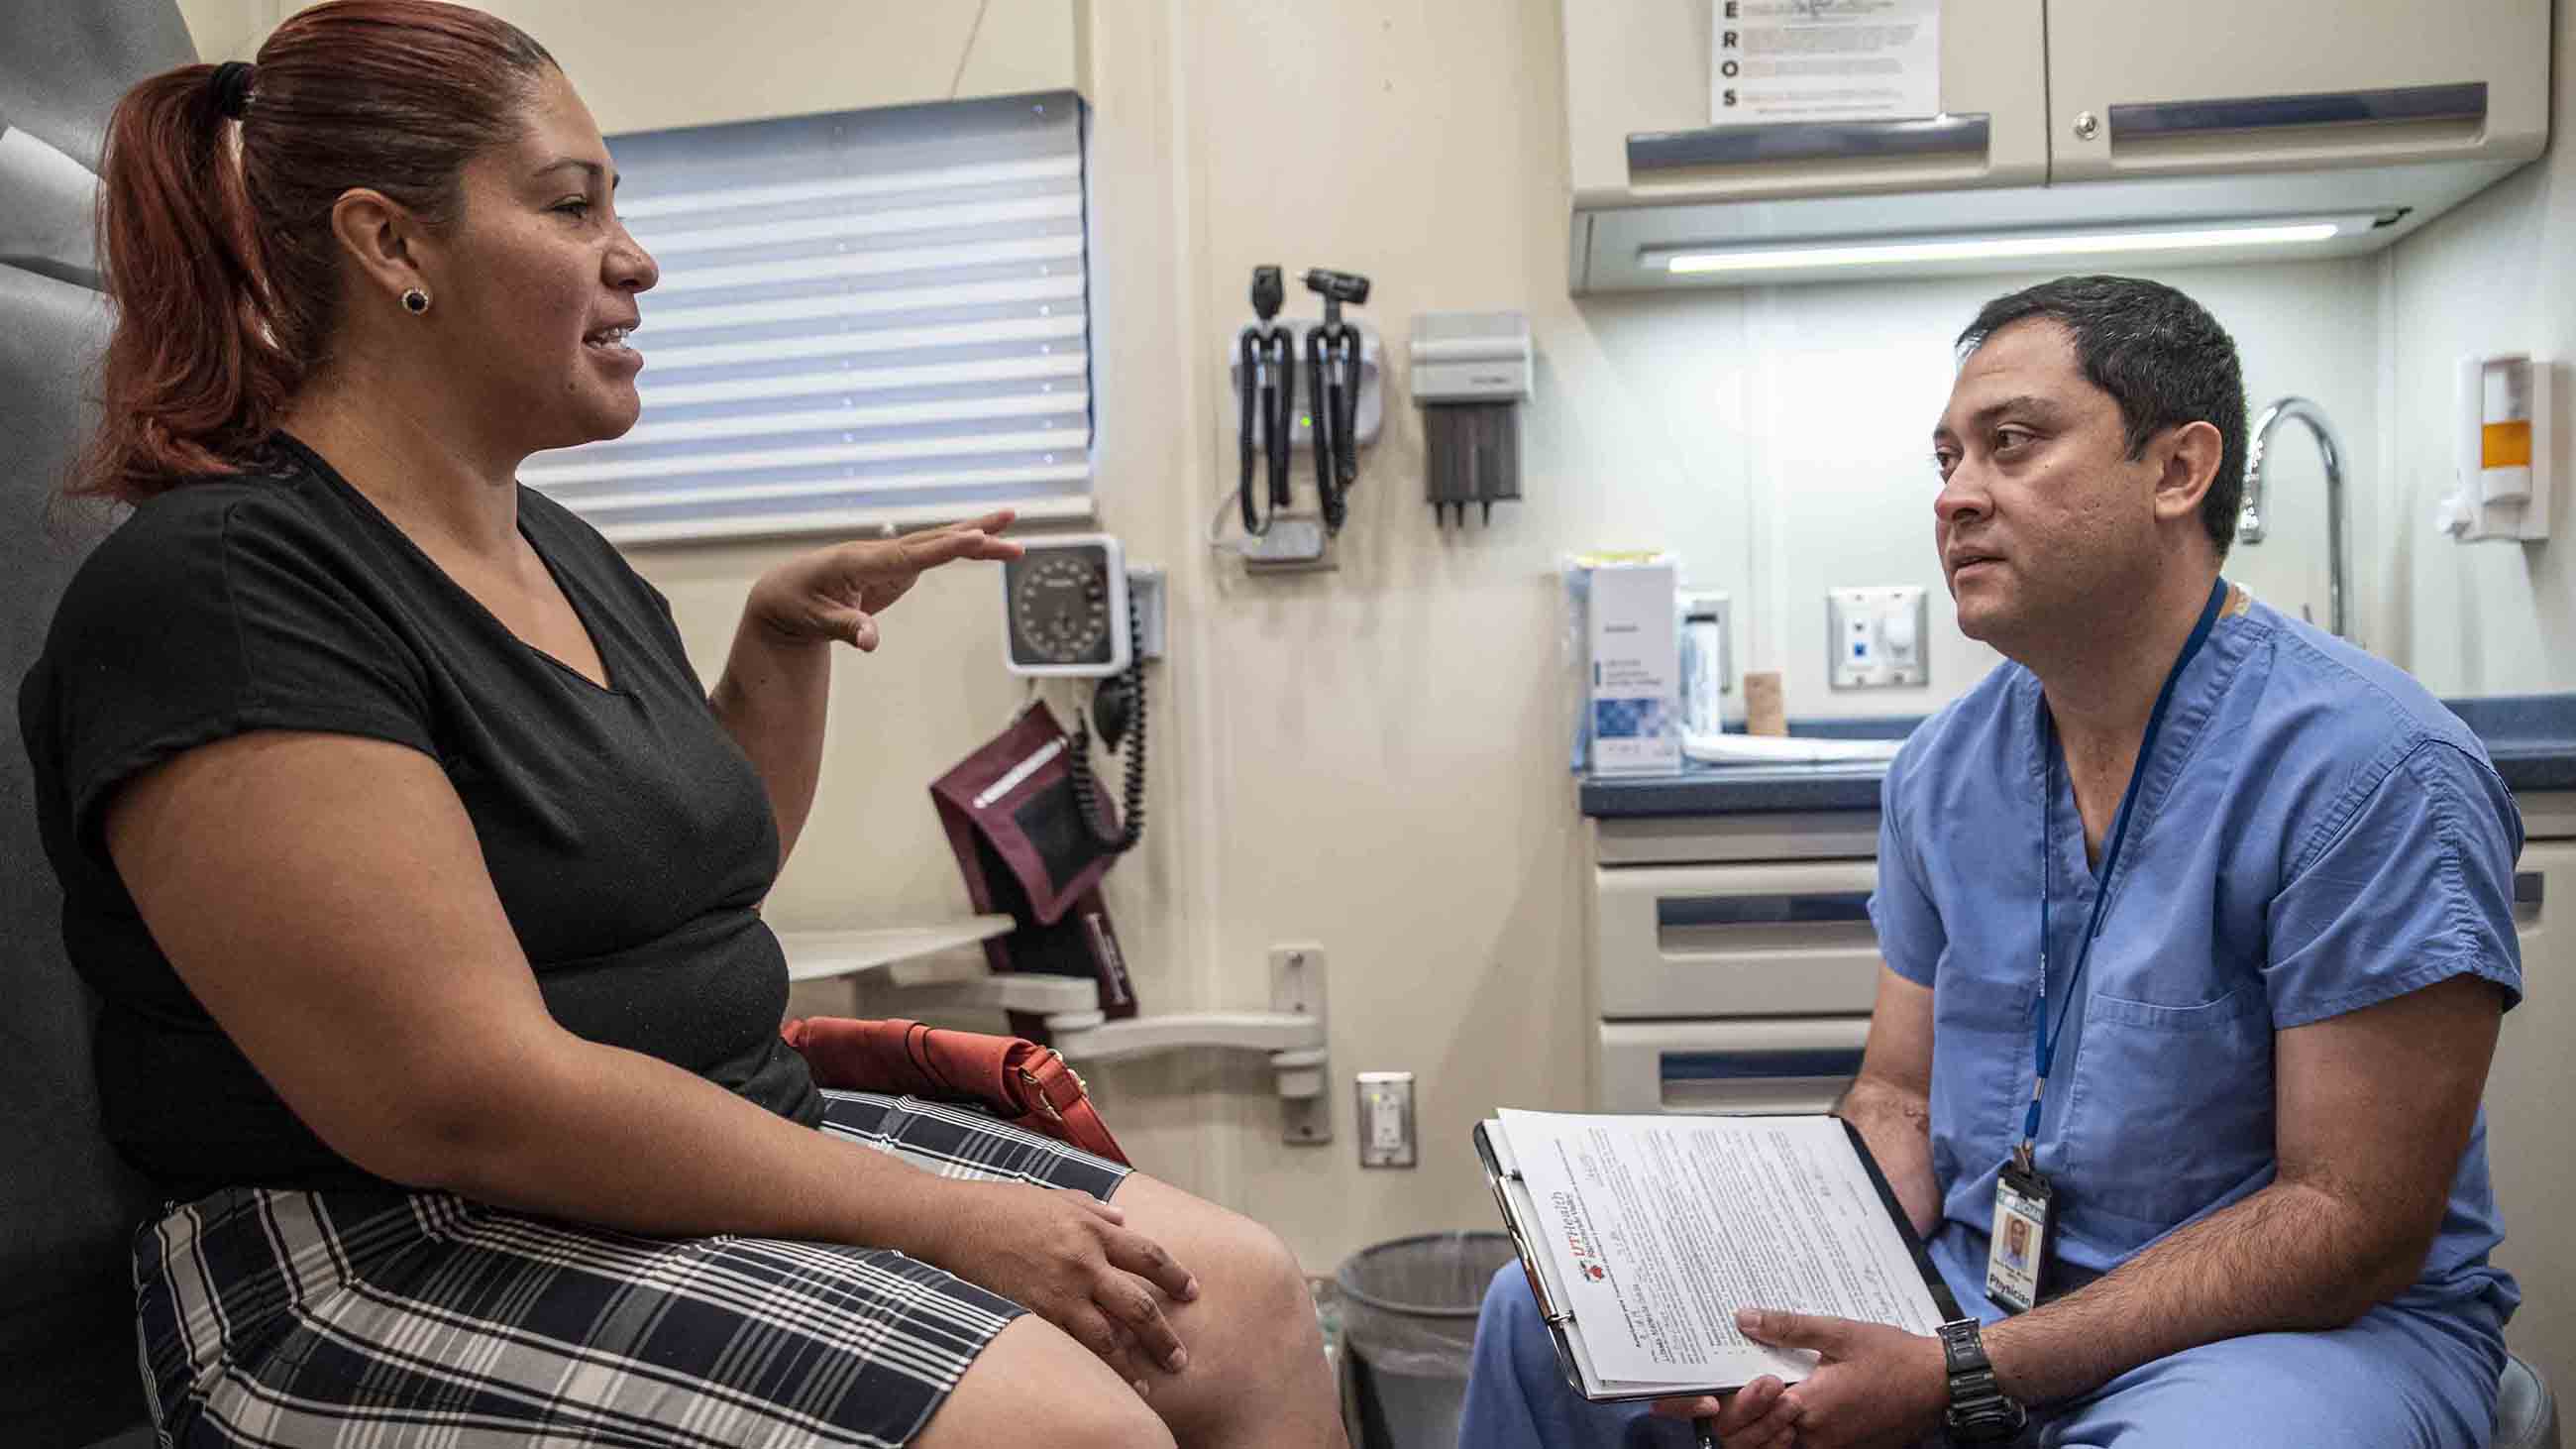 A Mobile Health Clinic Is Bringing Contraception to the Rio Grande Valley